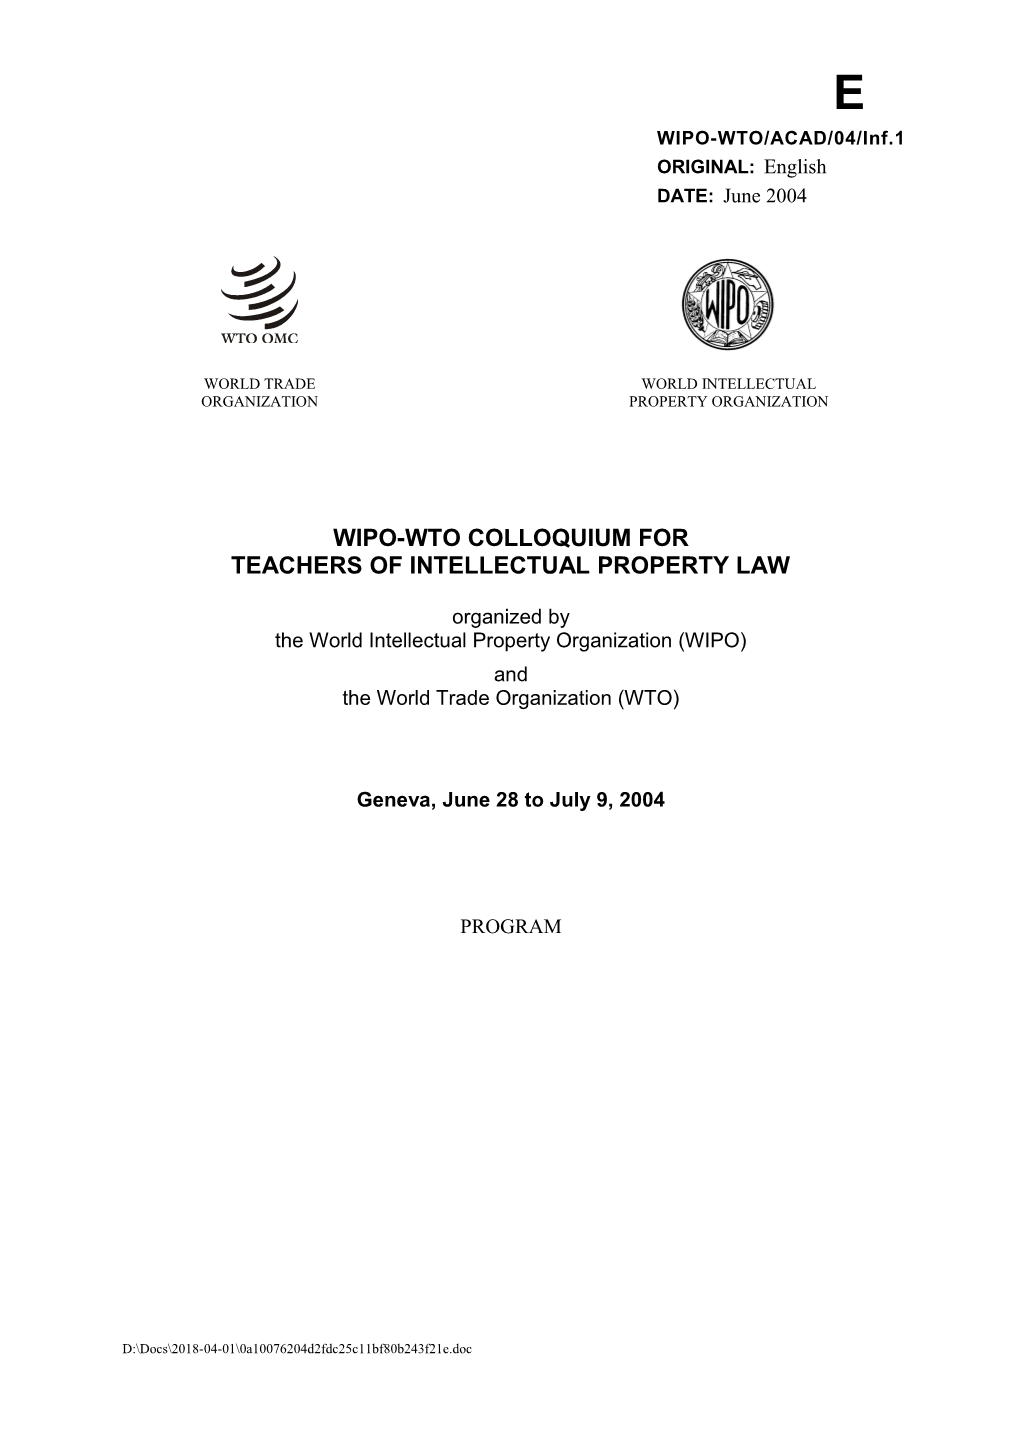 WIPO-WTO Colloquium for Developing Country Teachers of IP